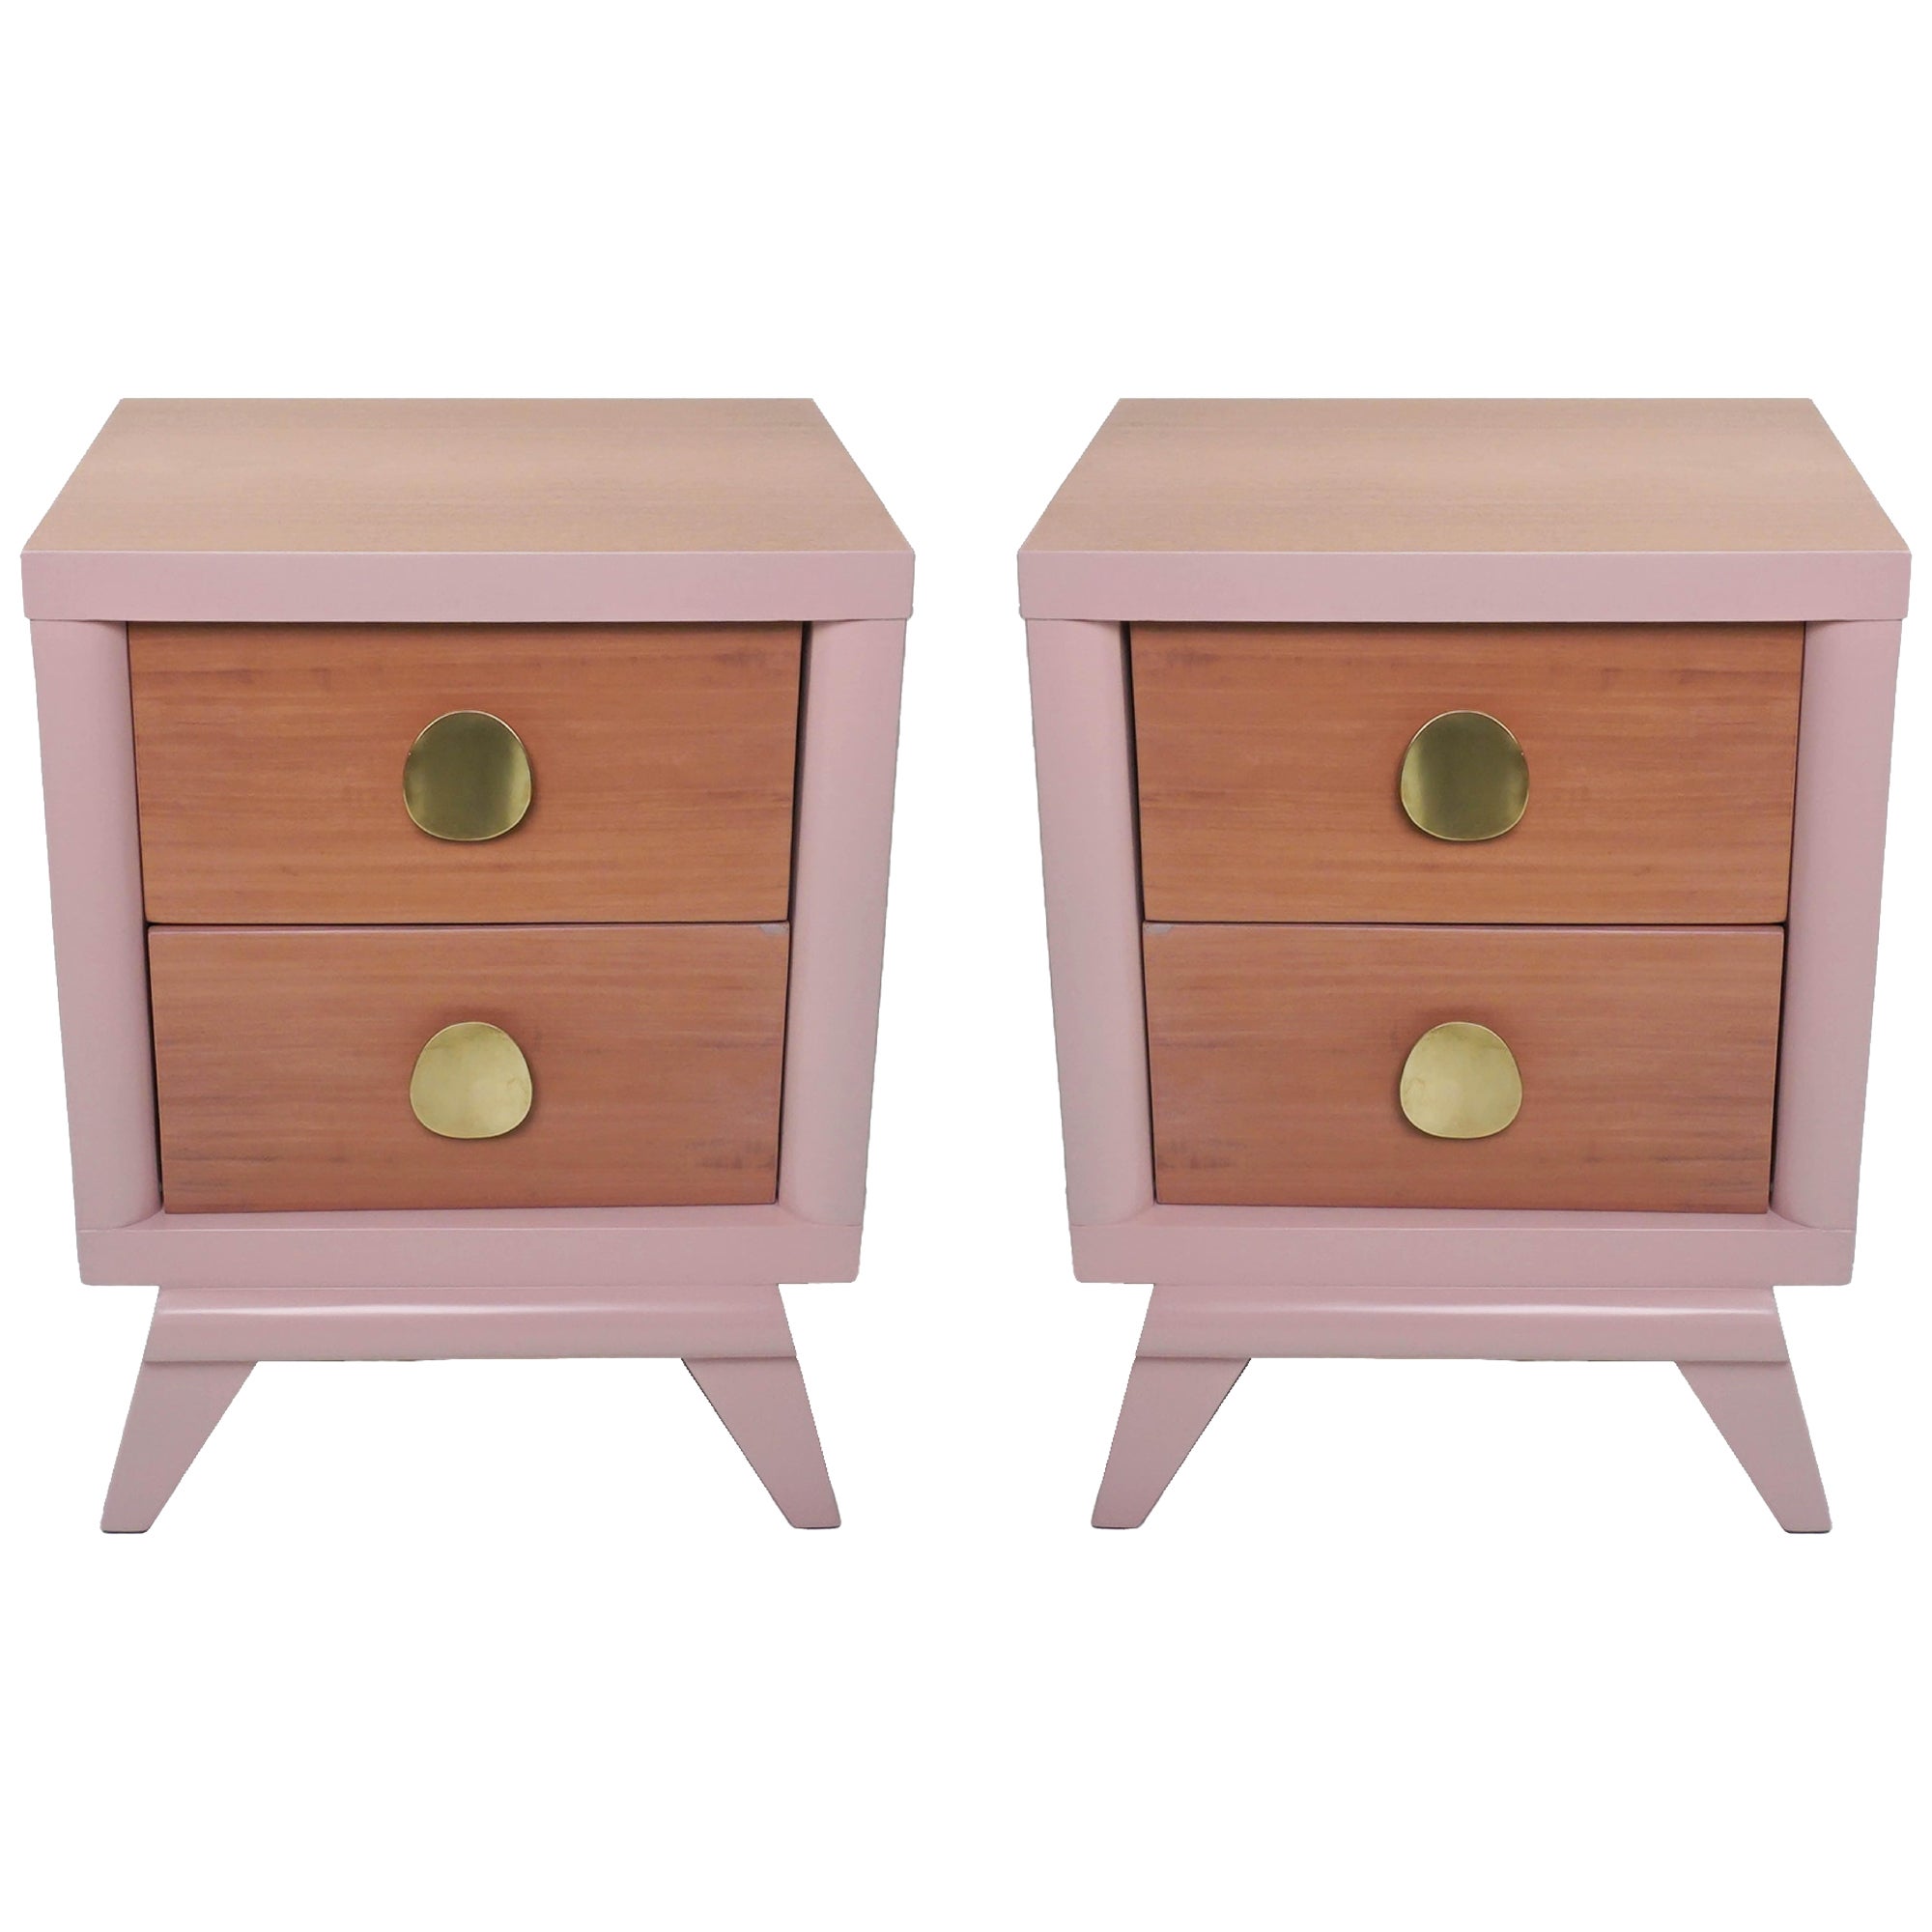 Pair of Mid-Century Mahogany End Tables in Dusty Pink For Sale